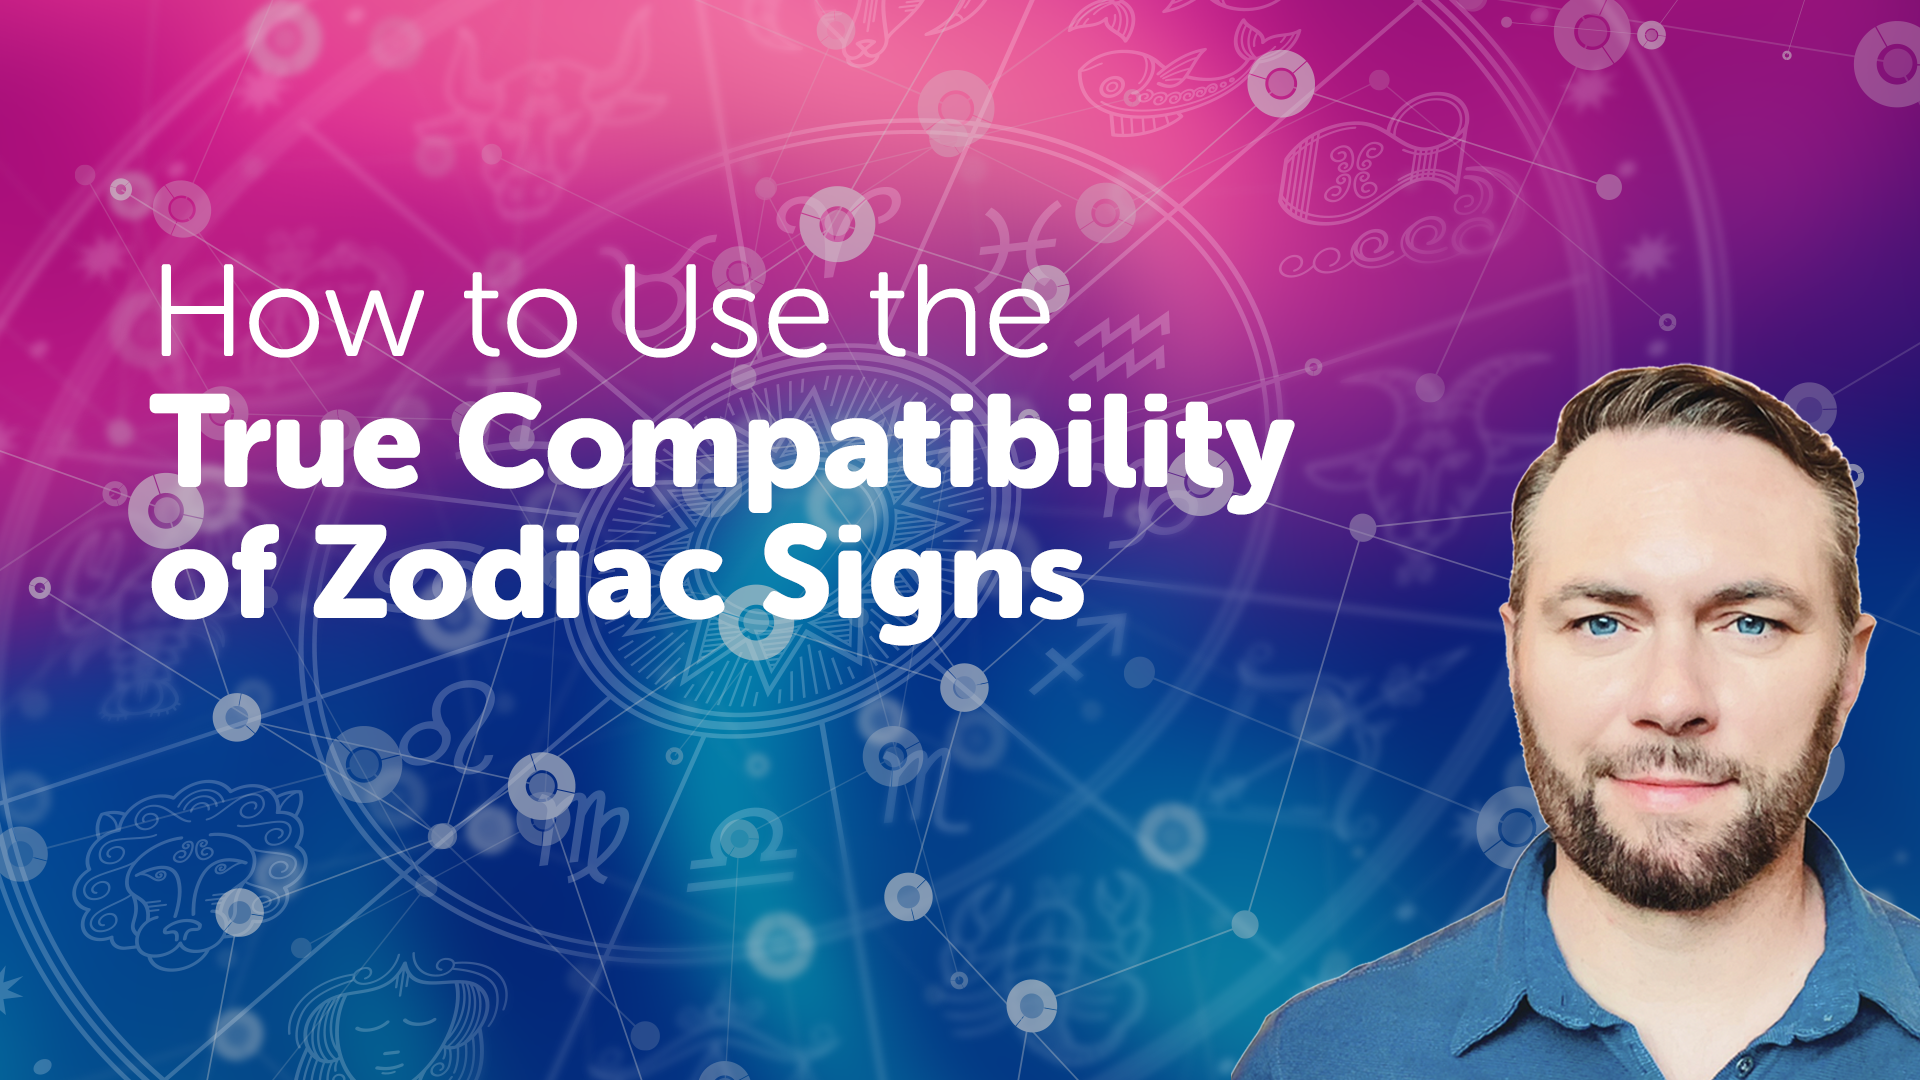 Video – How to Use the True Compatibility of Zodiac Signs